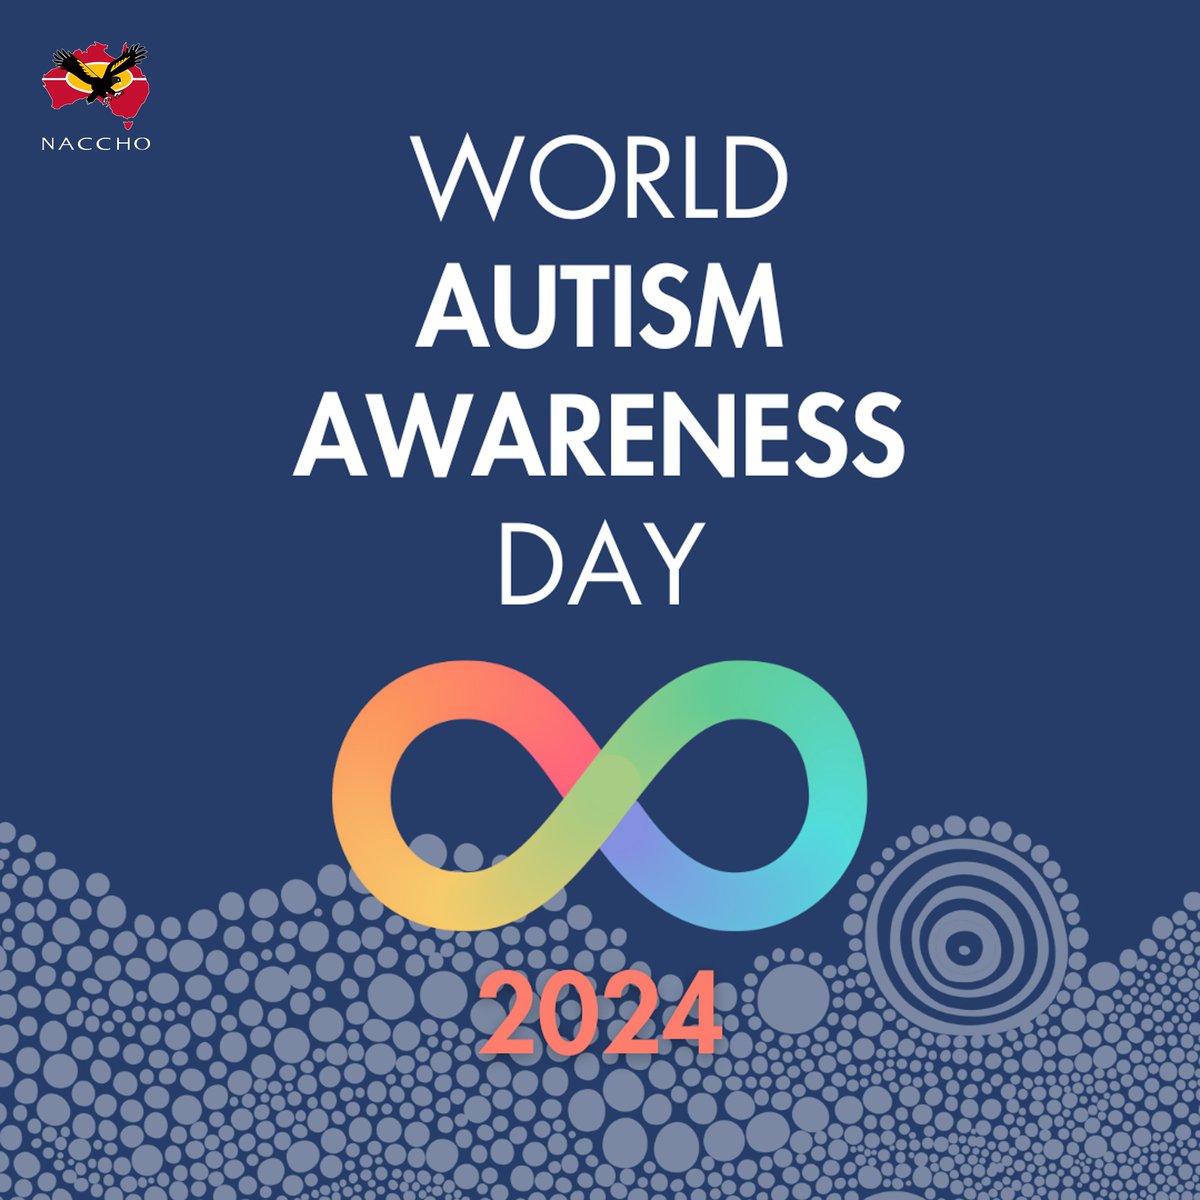 Today is #WorldAutismAwarenessDay recognising the diverse minds that enrich our world 🌈 @AutismSpectAust has developed a range of useful resources: aspect.org.au/waud